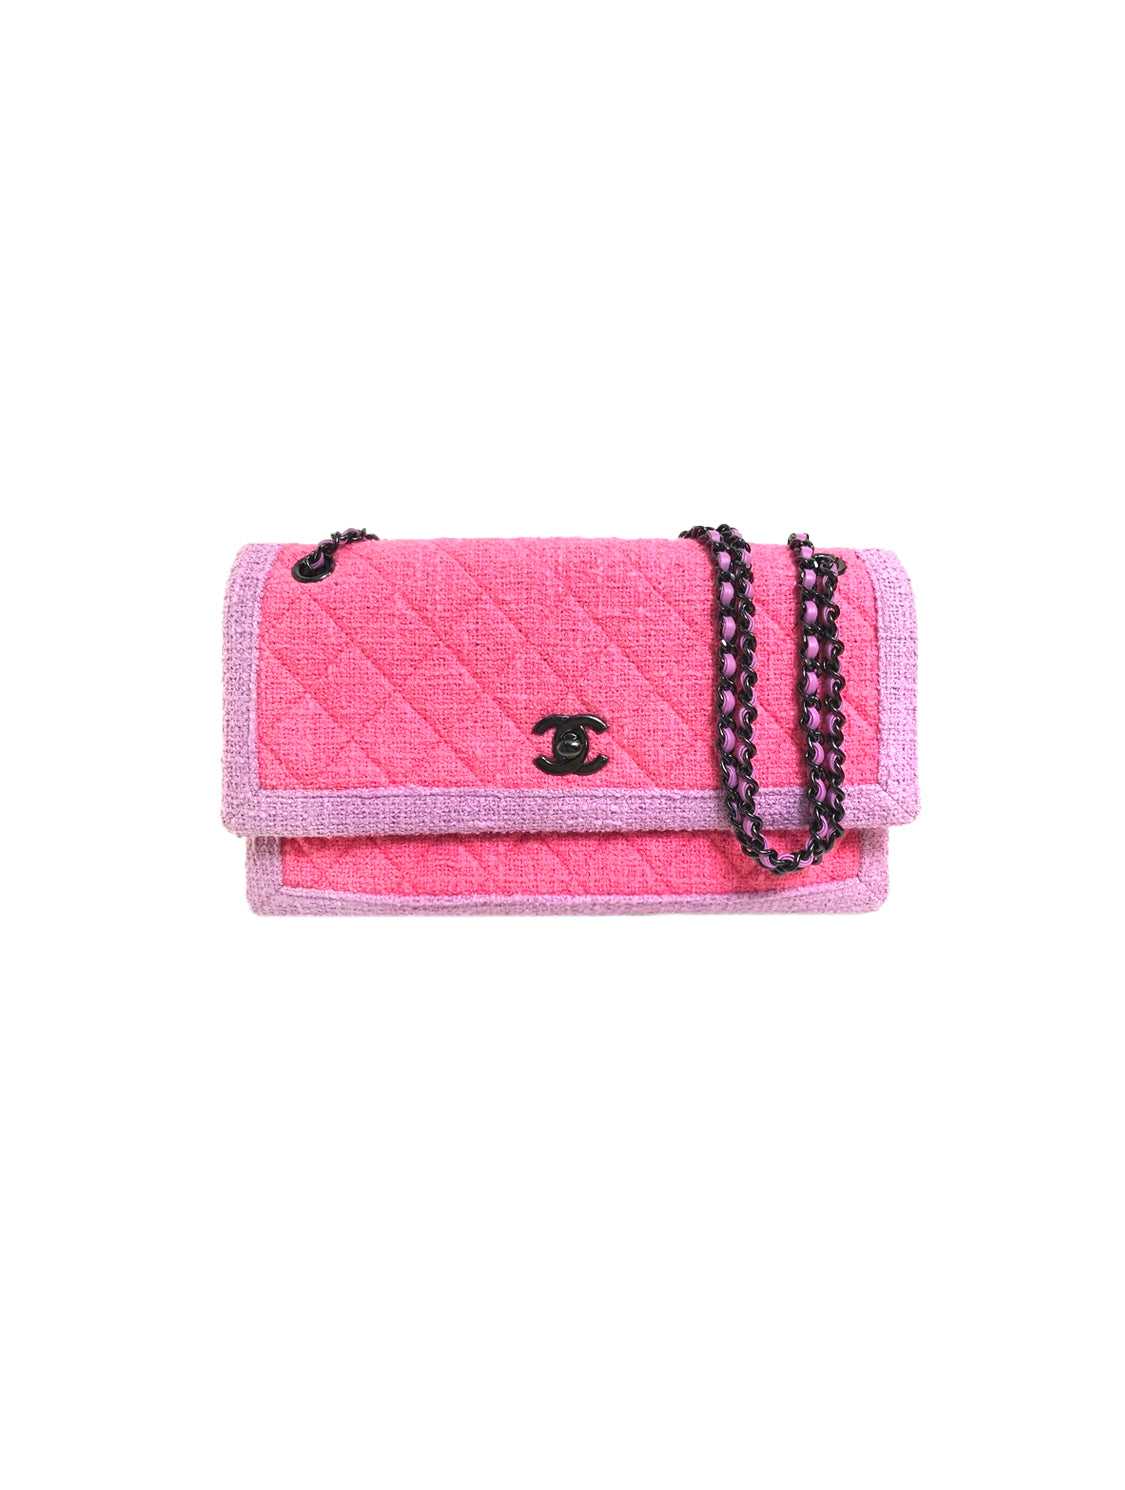 Chanel 2015-2016 Terrycloth Wallet Chain Flap